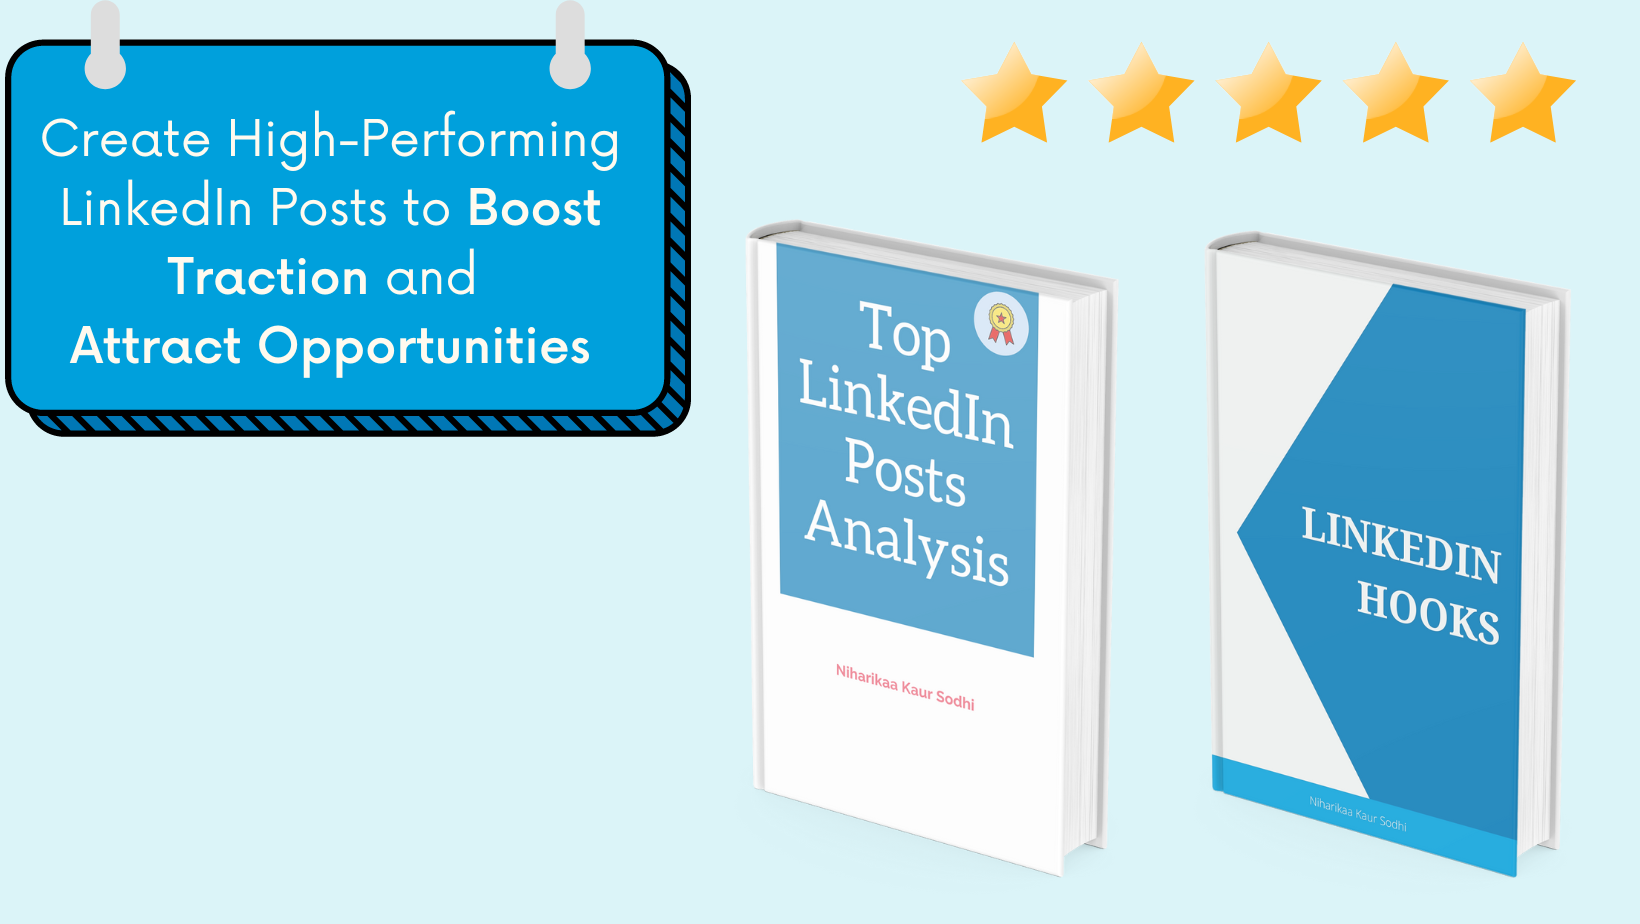 LinkedIn Content Mastery Playbook + Extras By Niharikaa Kaur Sodhi - Free Download